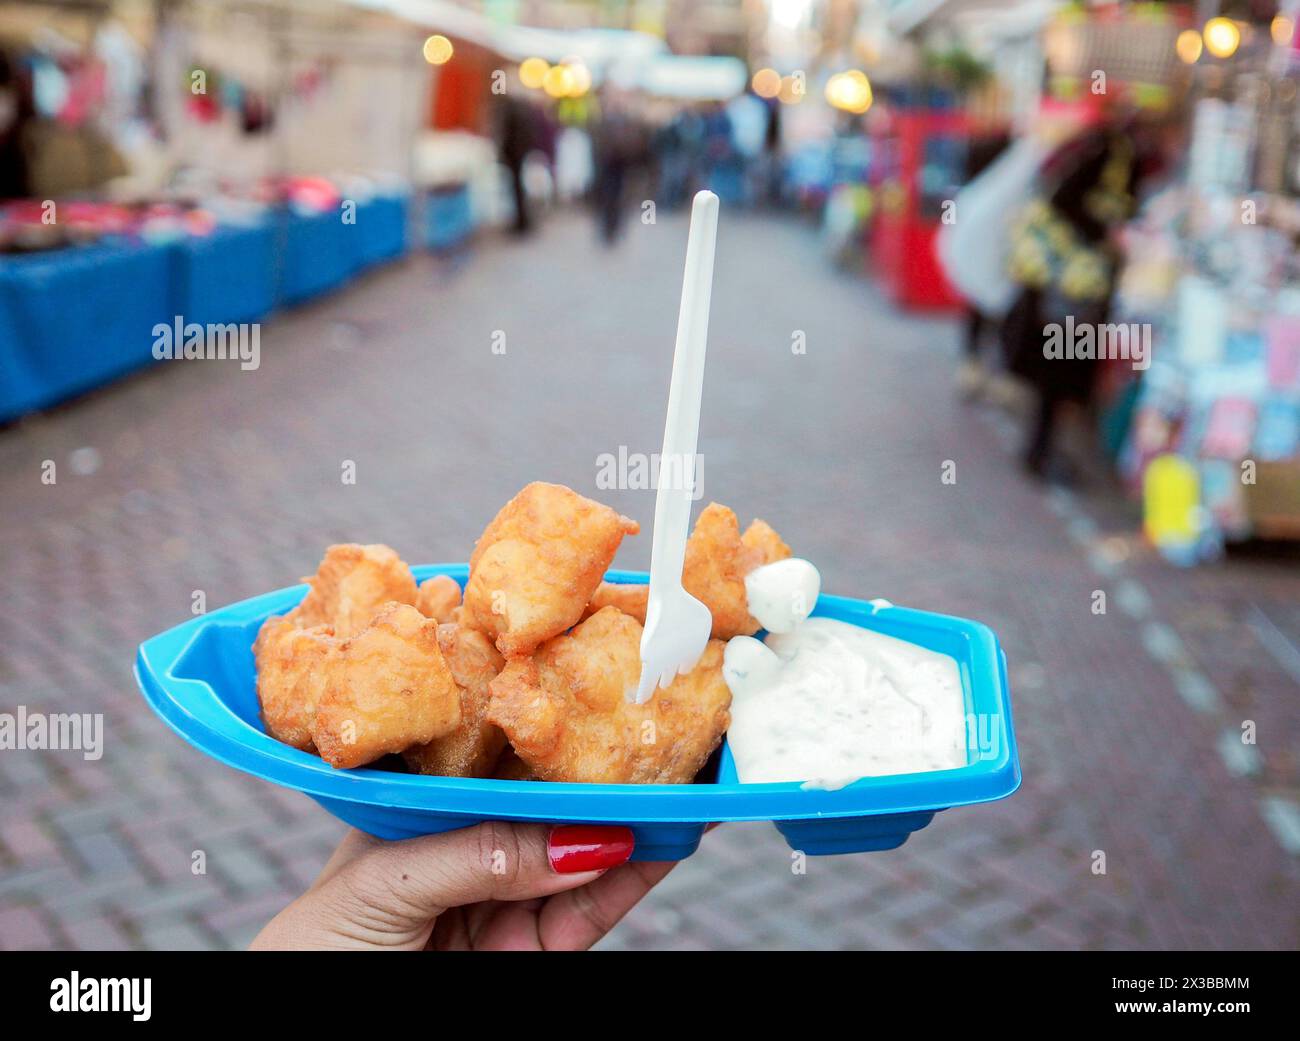 Kibbeling, the Dutch street food made of deep-fried cod can be easily found at the market or street in the country. Stock Photo